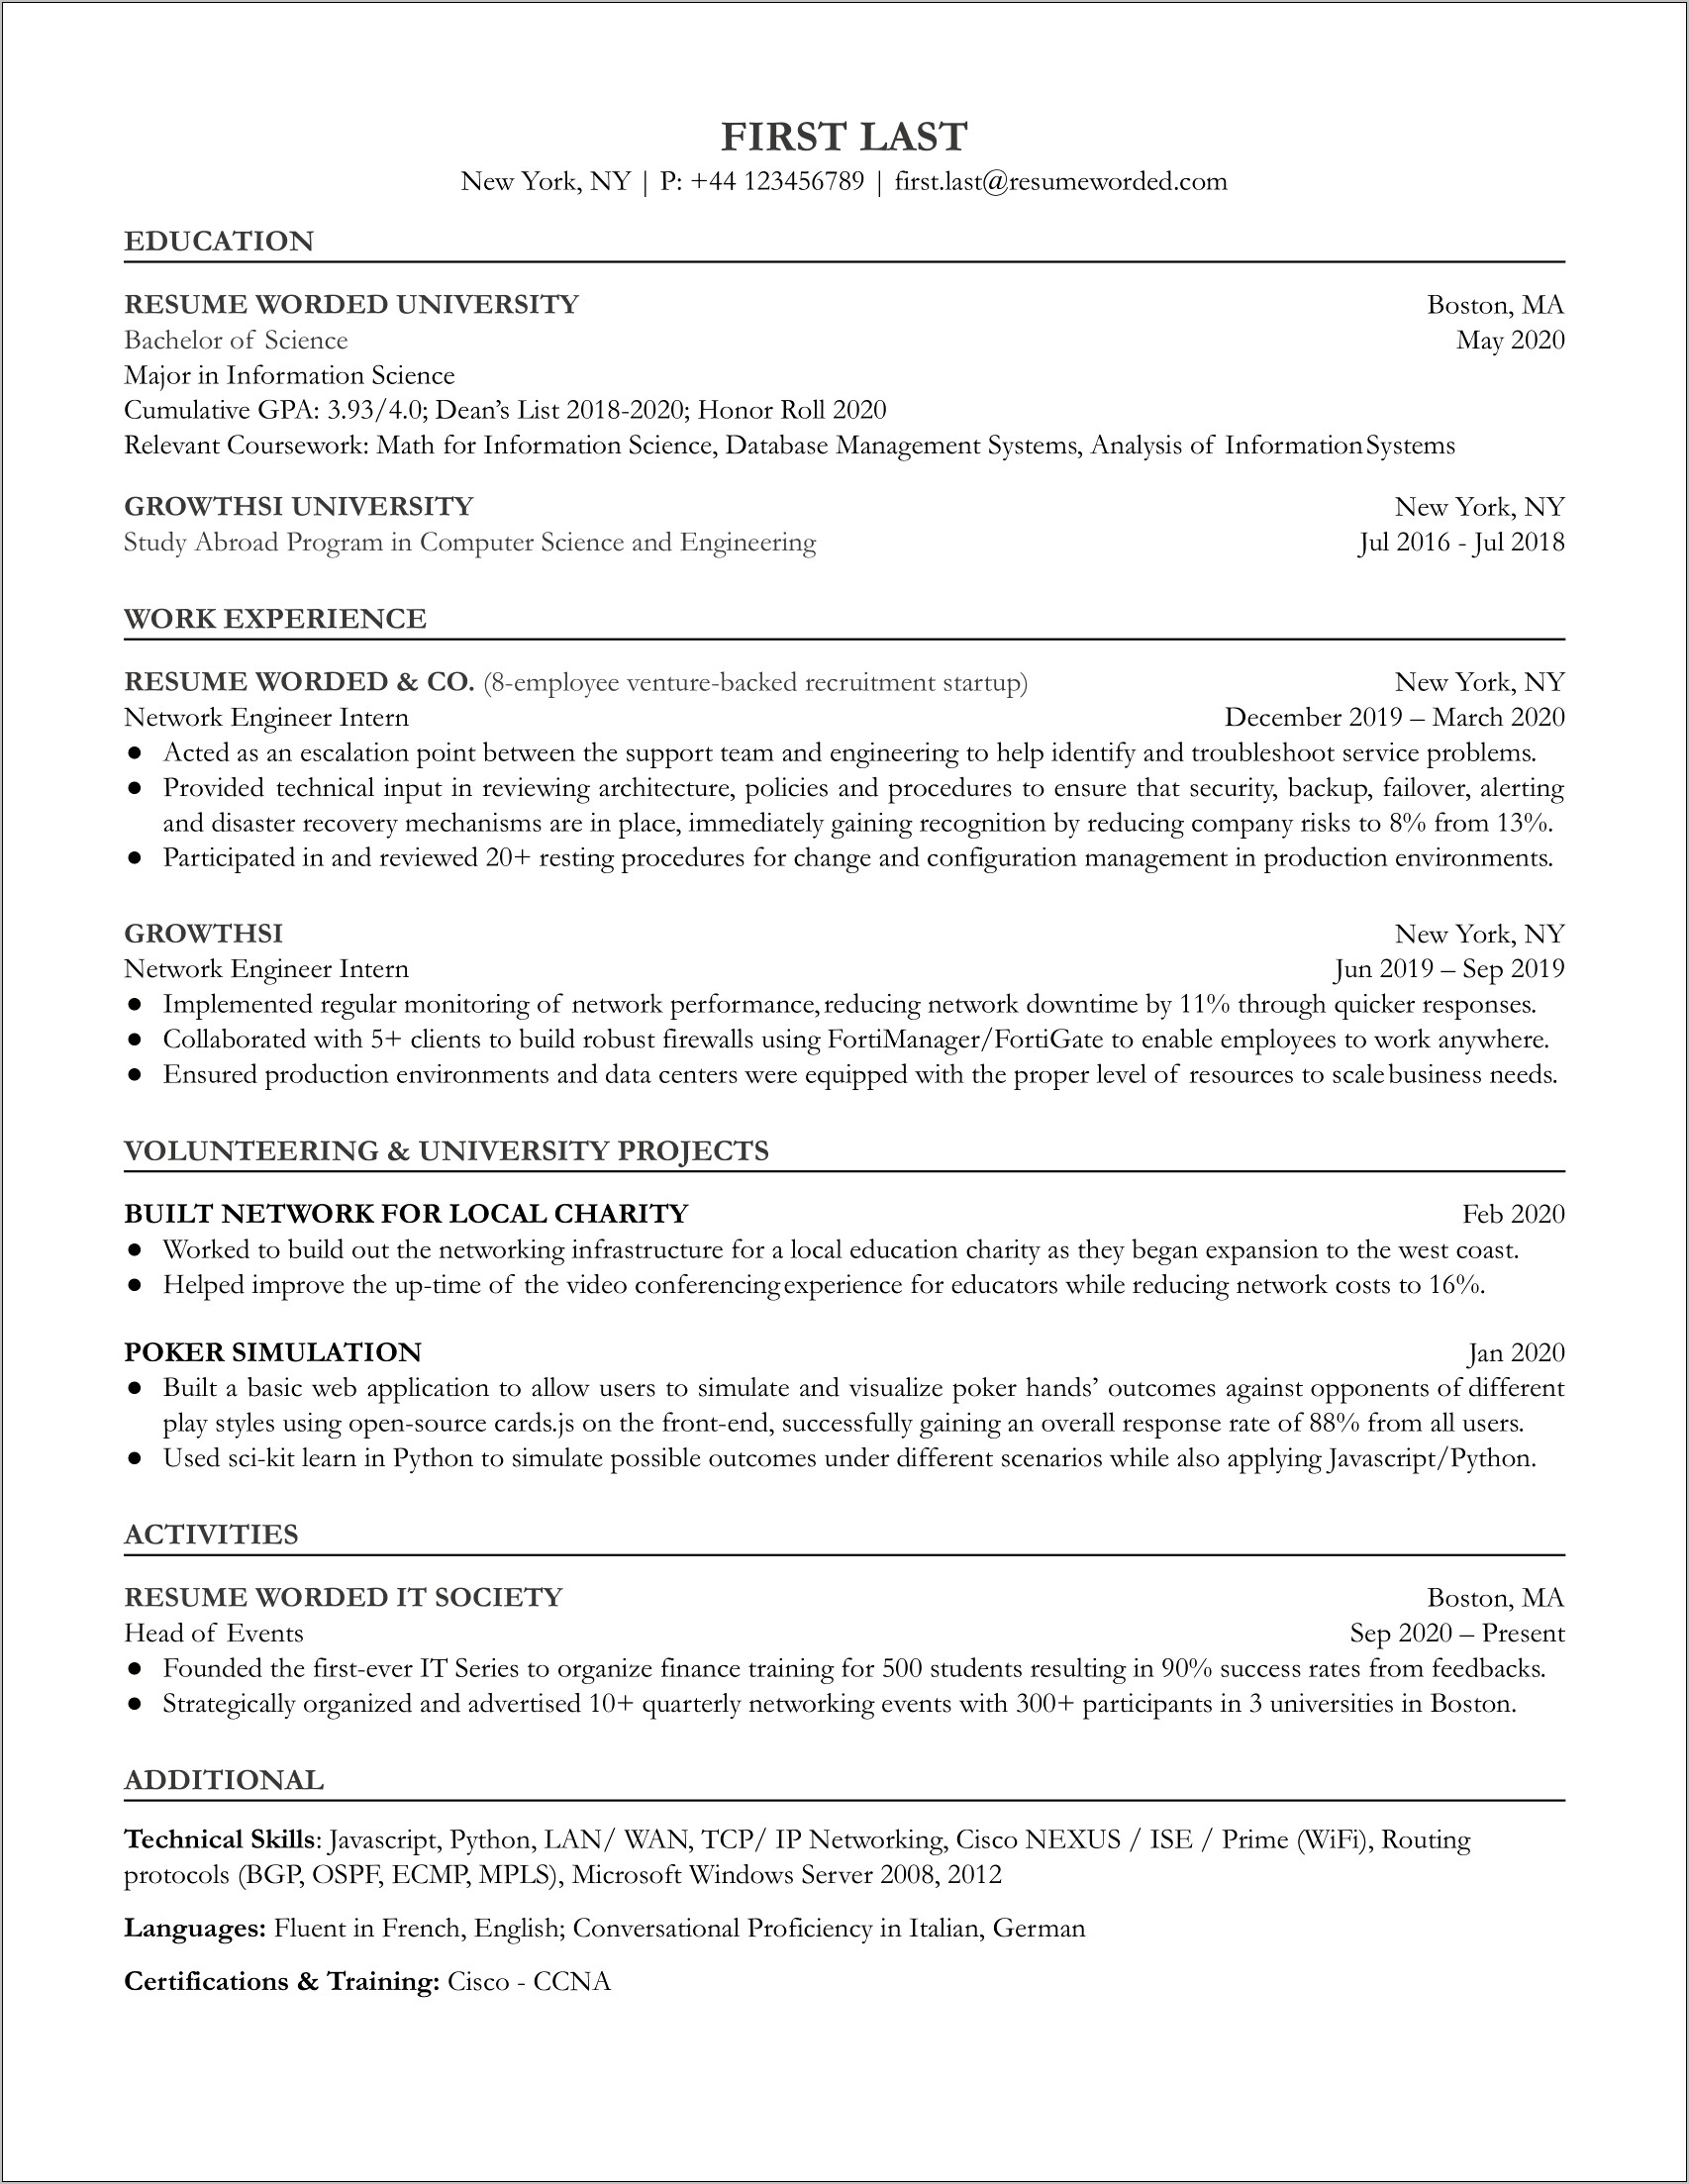 Entry Level Network Engineer Resume Example